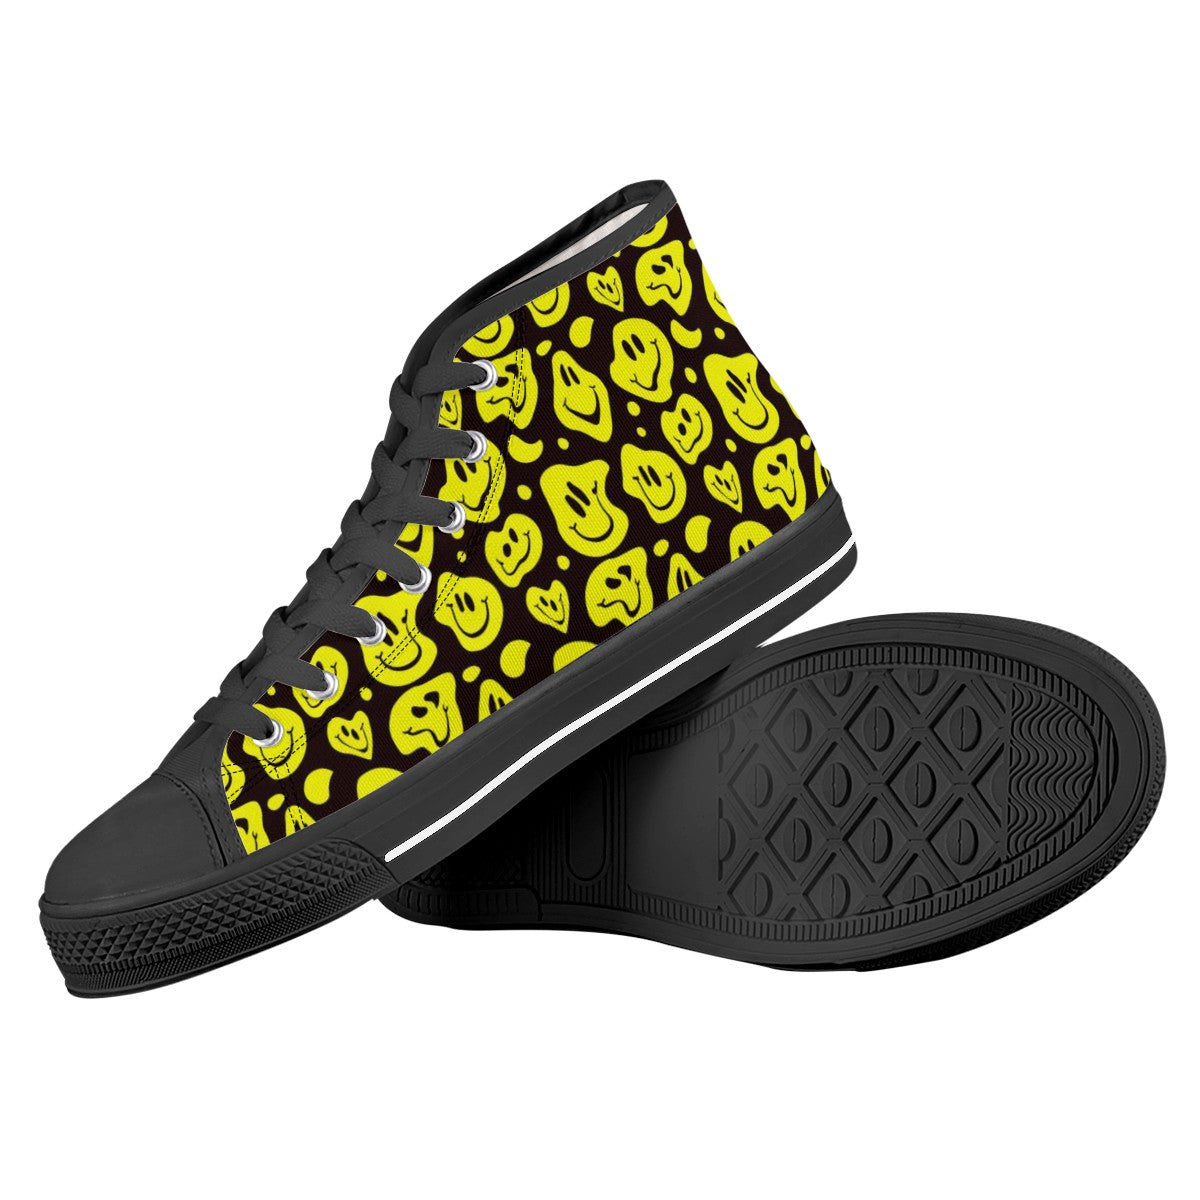 Melting Smiley Faces Drip Black High Top Canvas Shoes